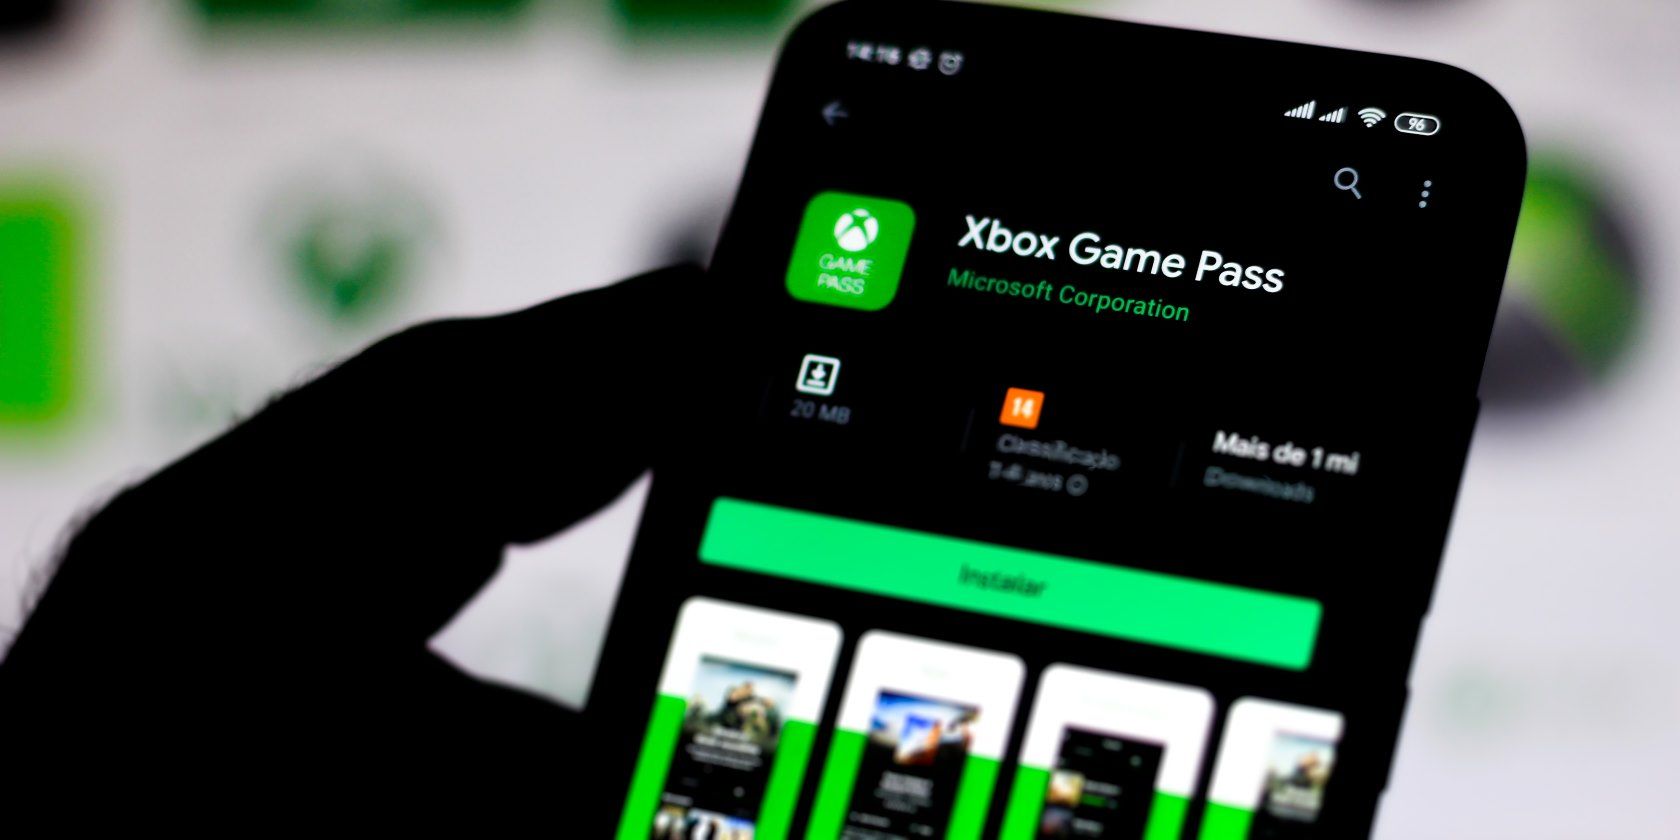 Someone installing the Xbox Game Pass app